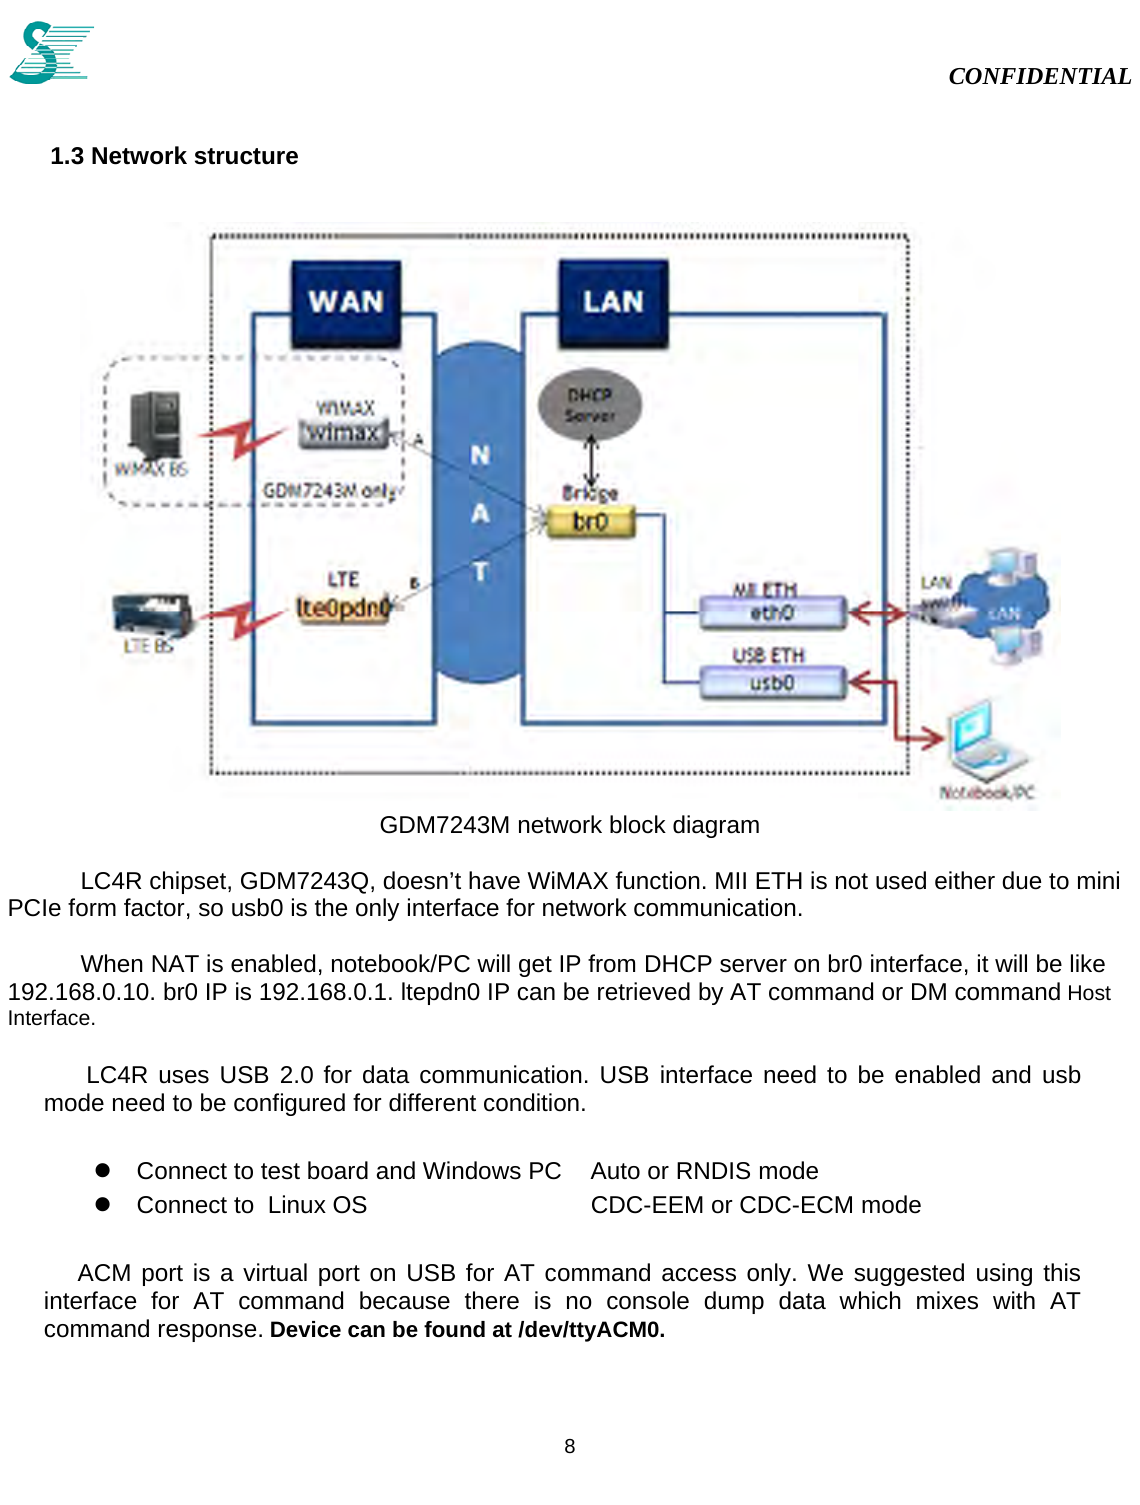                                                                                                                                                                                             CONFIDENTIAL           8   1.3 Network structure     GDM7243M network block diagram  LC4R chipset, GDM7243Q, doesn’t have WiMAX function. MII ETH is not used either due to mini PCIe form factor, so usb0 is the only interface for network communication.  When NAT is enabled, notebook/PC will get IP from DHCP server on br0 interface, it will be like 192.168.0.10. br0 IP is 192.168.0.1. ltepdn0 IP can be retrieved by AT command or DM command Host Interface.        LC4R uses USB 2.0 for data communication. USB interface need to be enabled and usb mode need to be configured for different condition.    Connect to test board and Windows PC    Auto or RNDIS mode   Connect to  Linux OS       CDC-EEM or CDC-ECM mode        ACM port is a virtual port on USB for AT command access only. We suggested using this interface for AT command because there is no console dump data which mixes with AT command response. Device can be found at /dev/ttyACM0.   